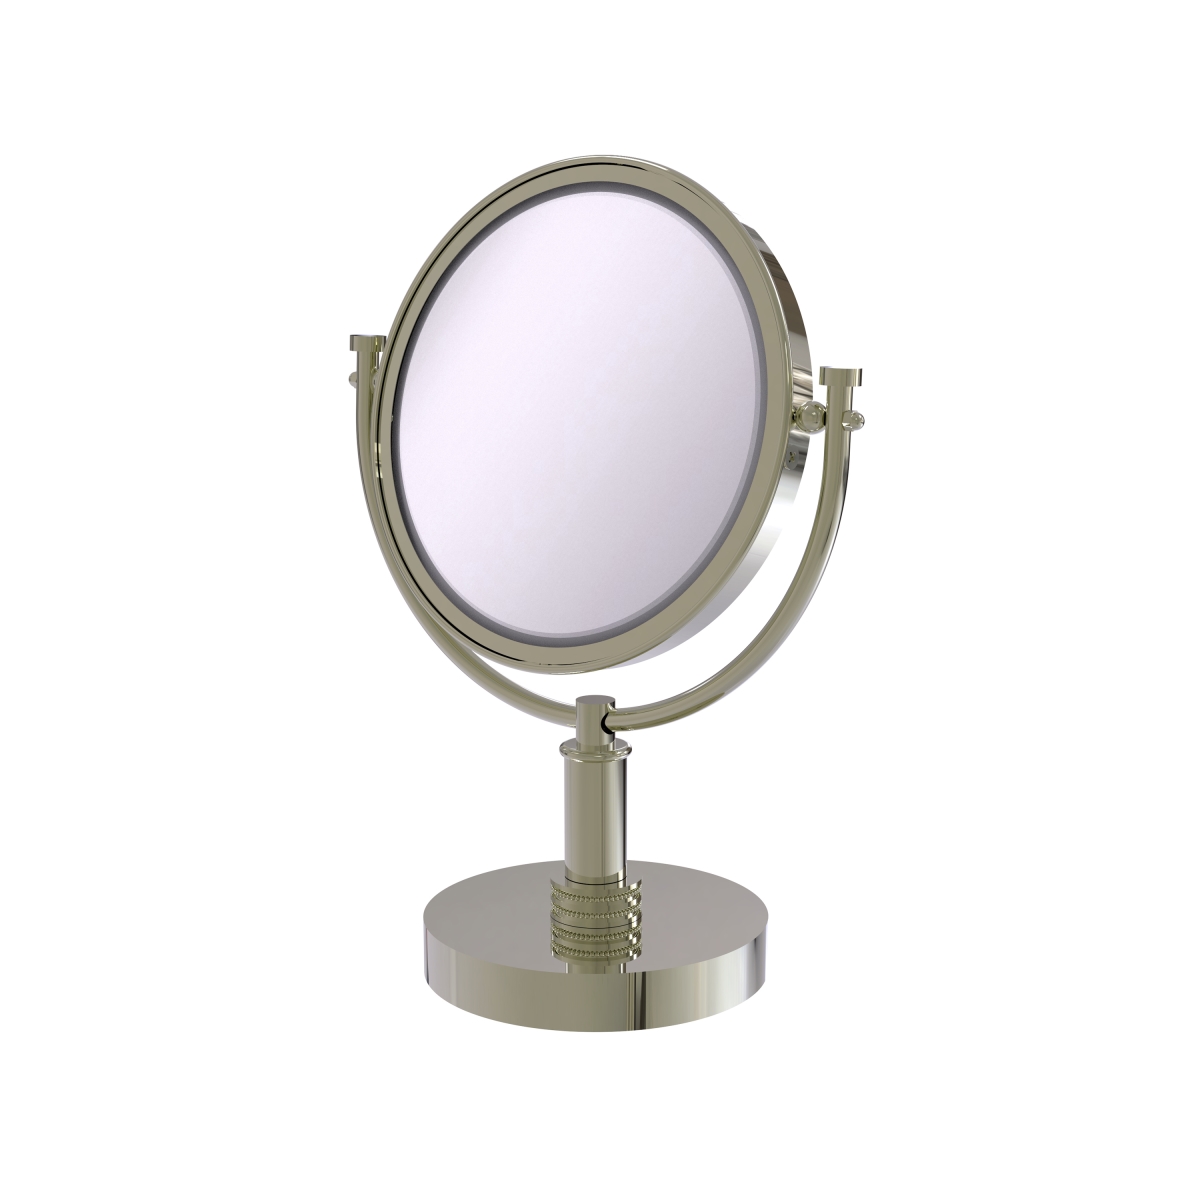 DM-4D-5X-PNI 8 in. Vanity Top Make-Up Mirror 5X Magnification, Polished Nickel - 15 x 8 x 8 in -  Allied Brass, DM-4D/5X-PNI